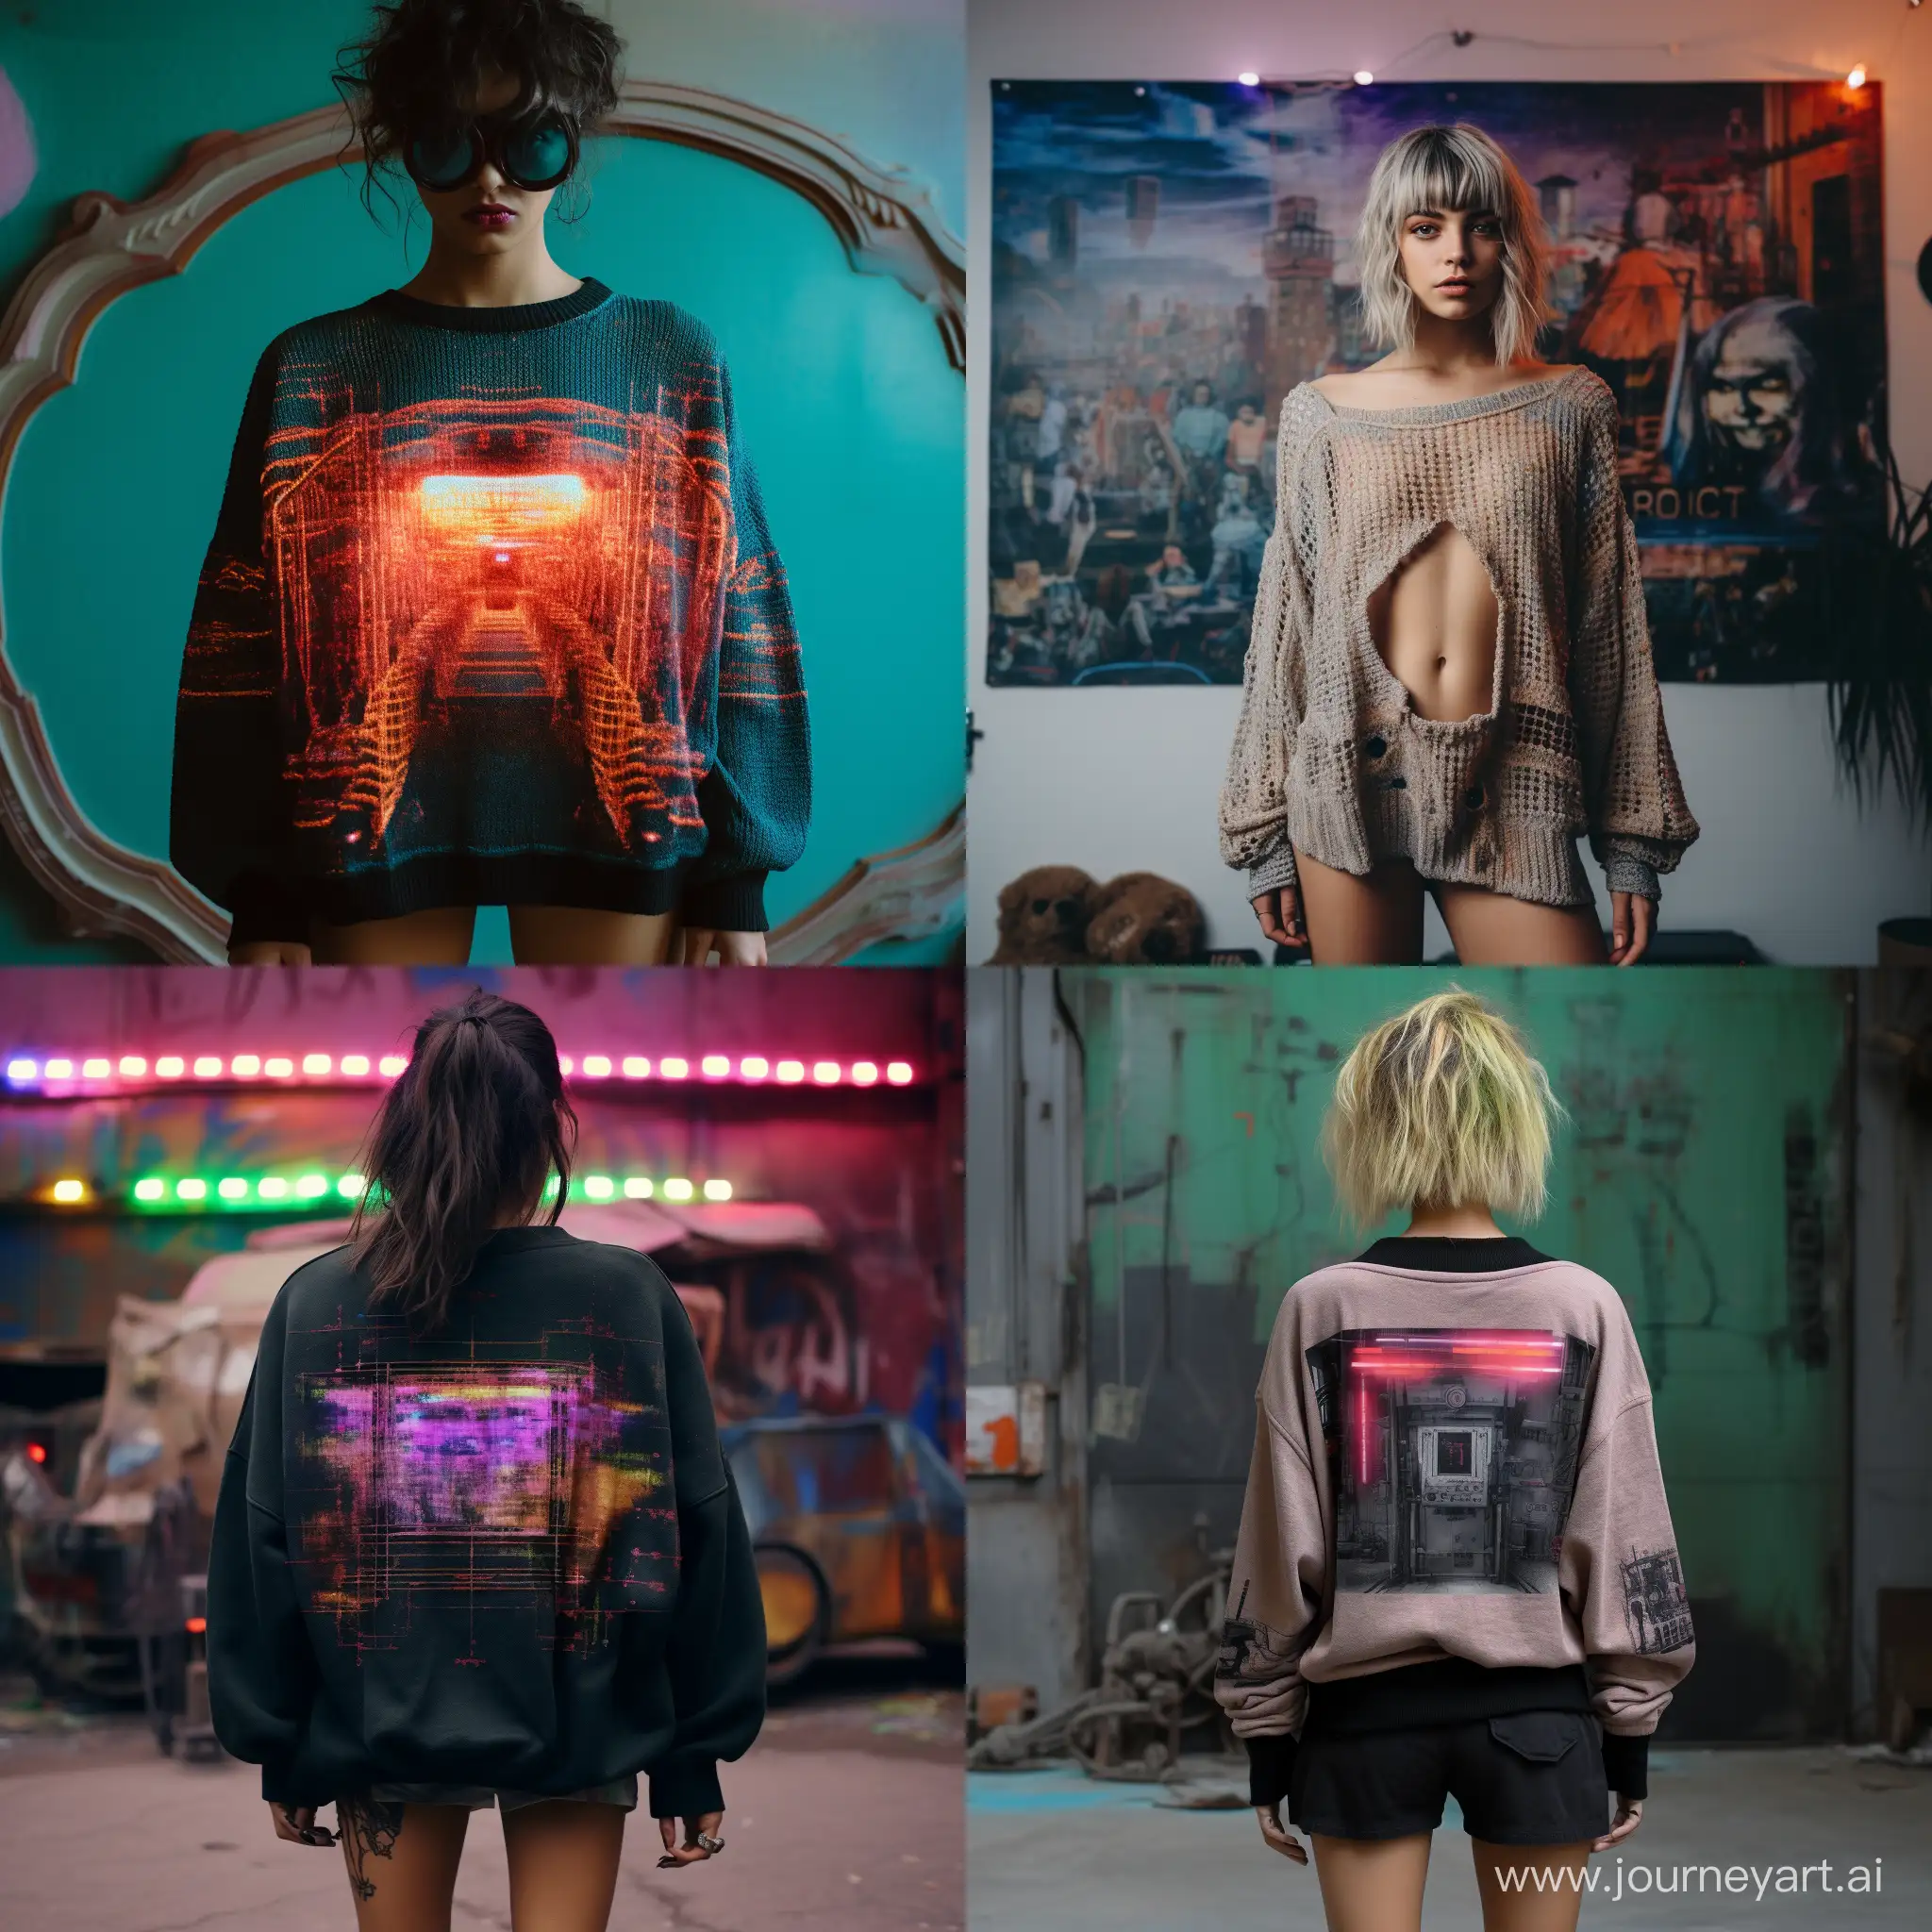 A photo of an oversize knitted sweater with a flat image on a sweater where a computer controls the world, the image is connected from threads, it subdued every person and plant, the punk style of the 80s, cyberpunk films, without people in the picture